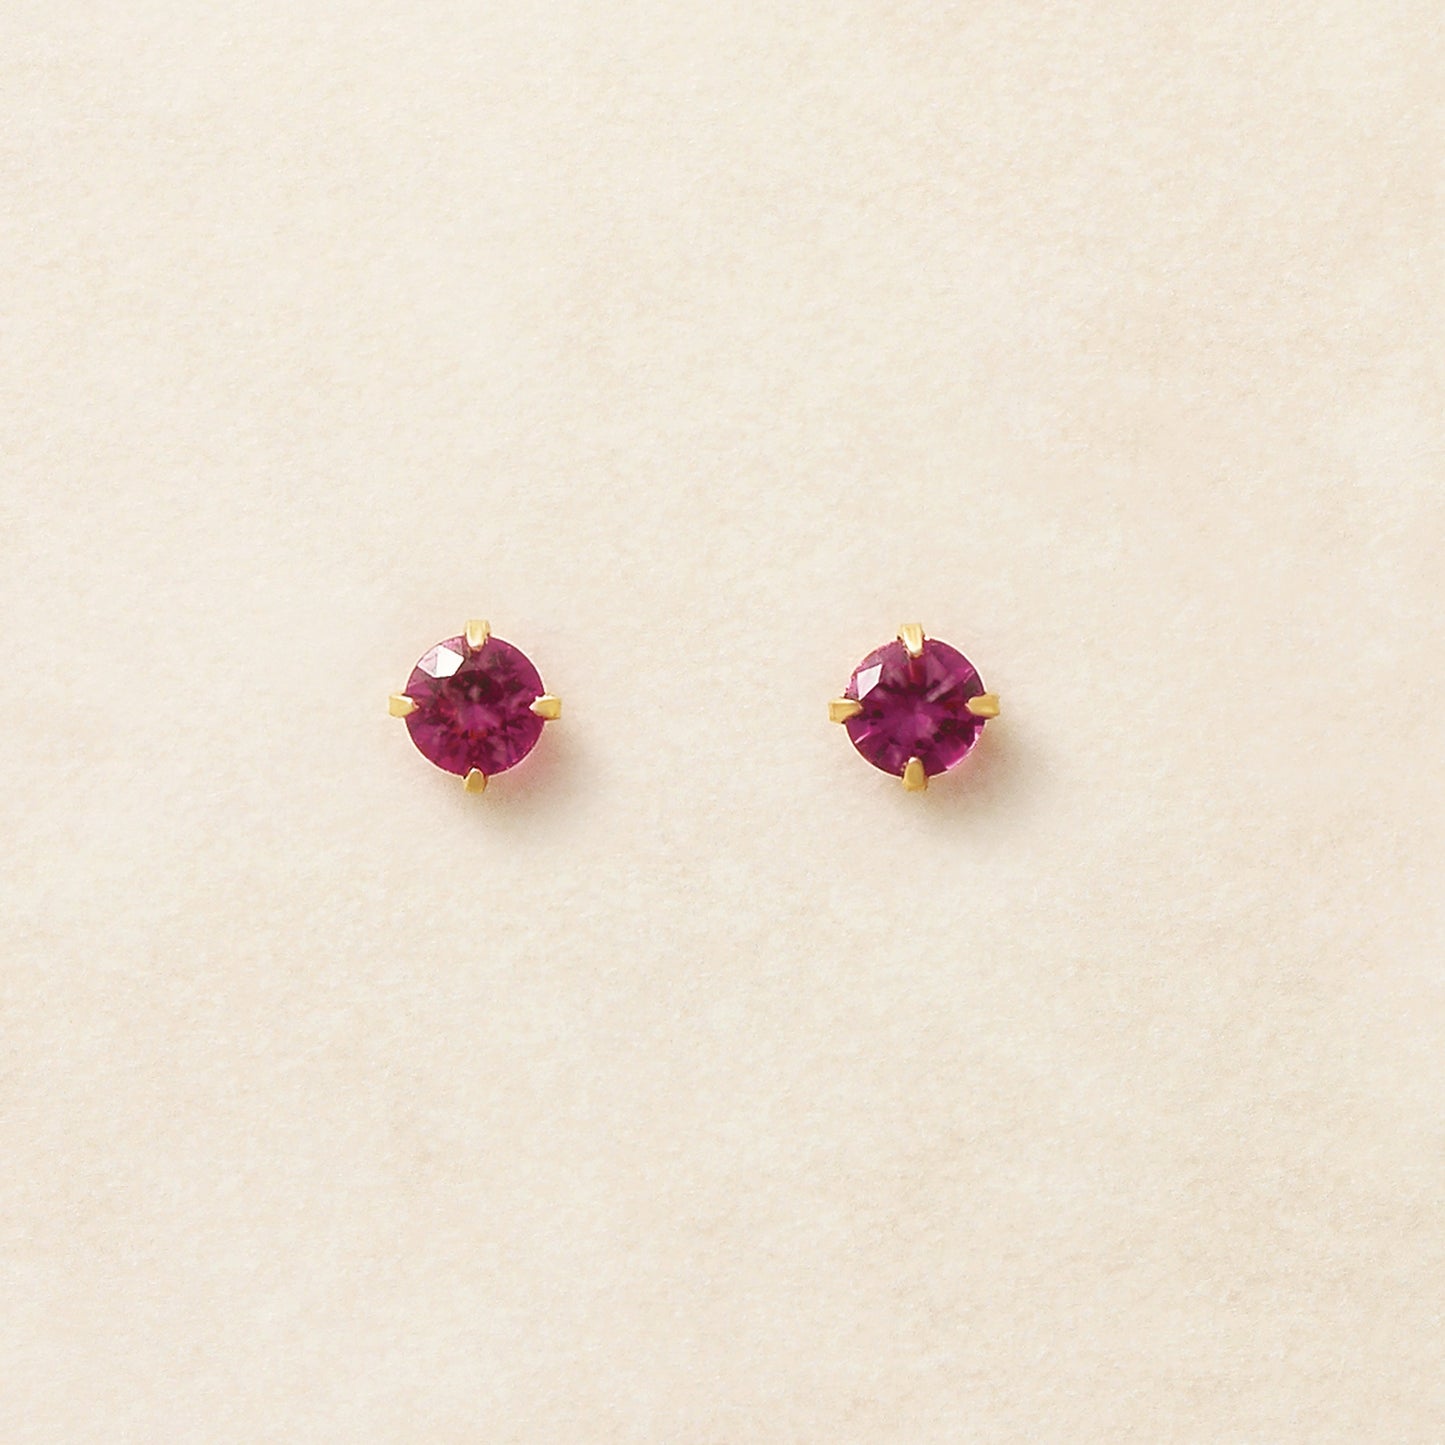 [Second Earrings] 18K Yellow Gold Ruby Earrings - Product Image